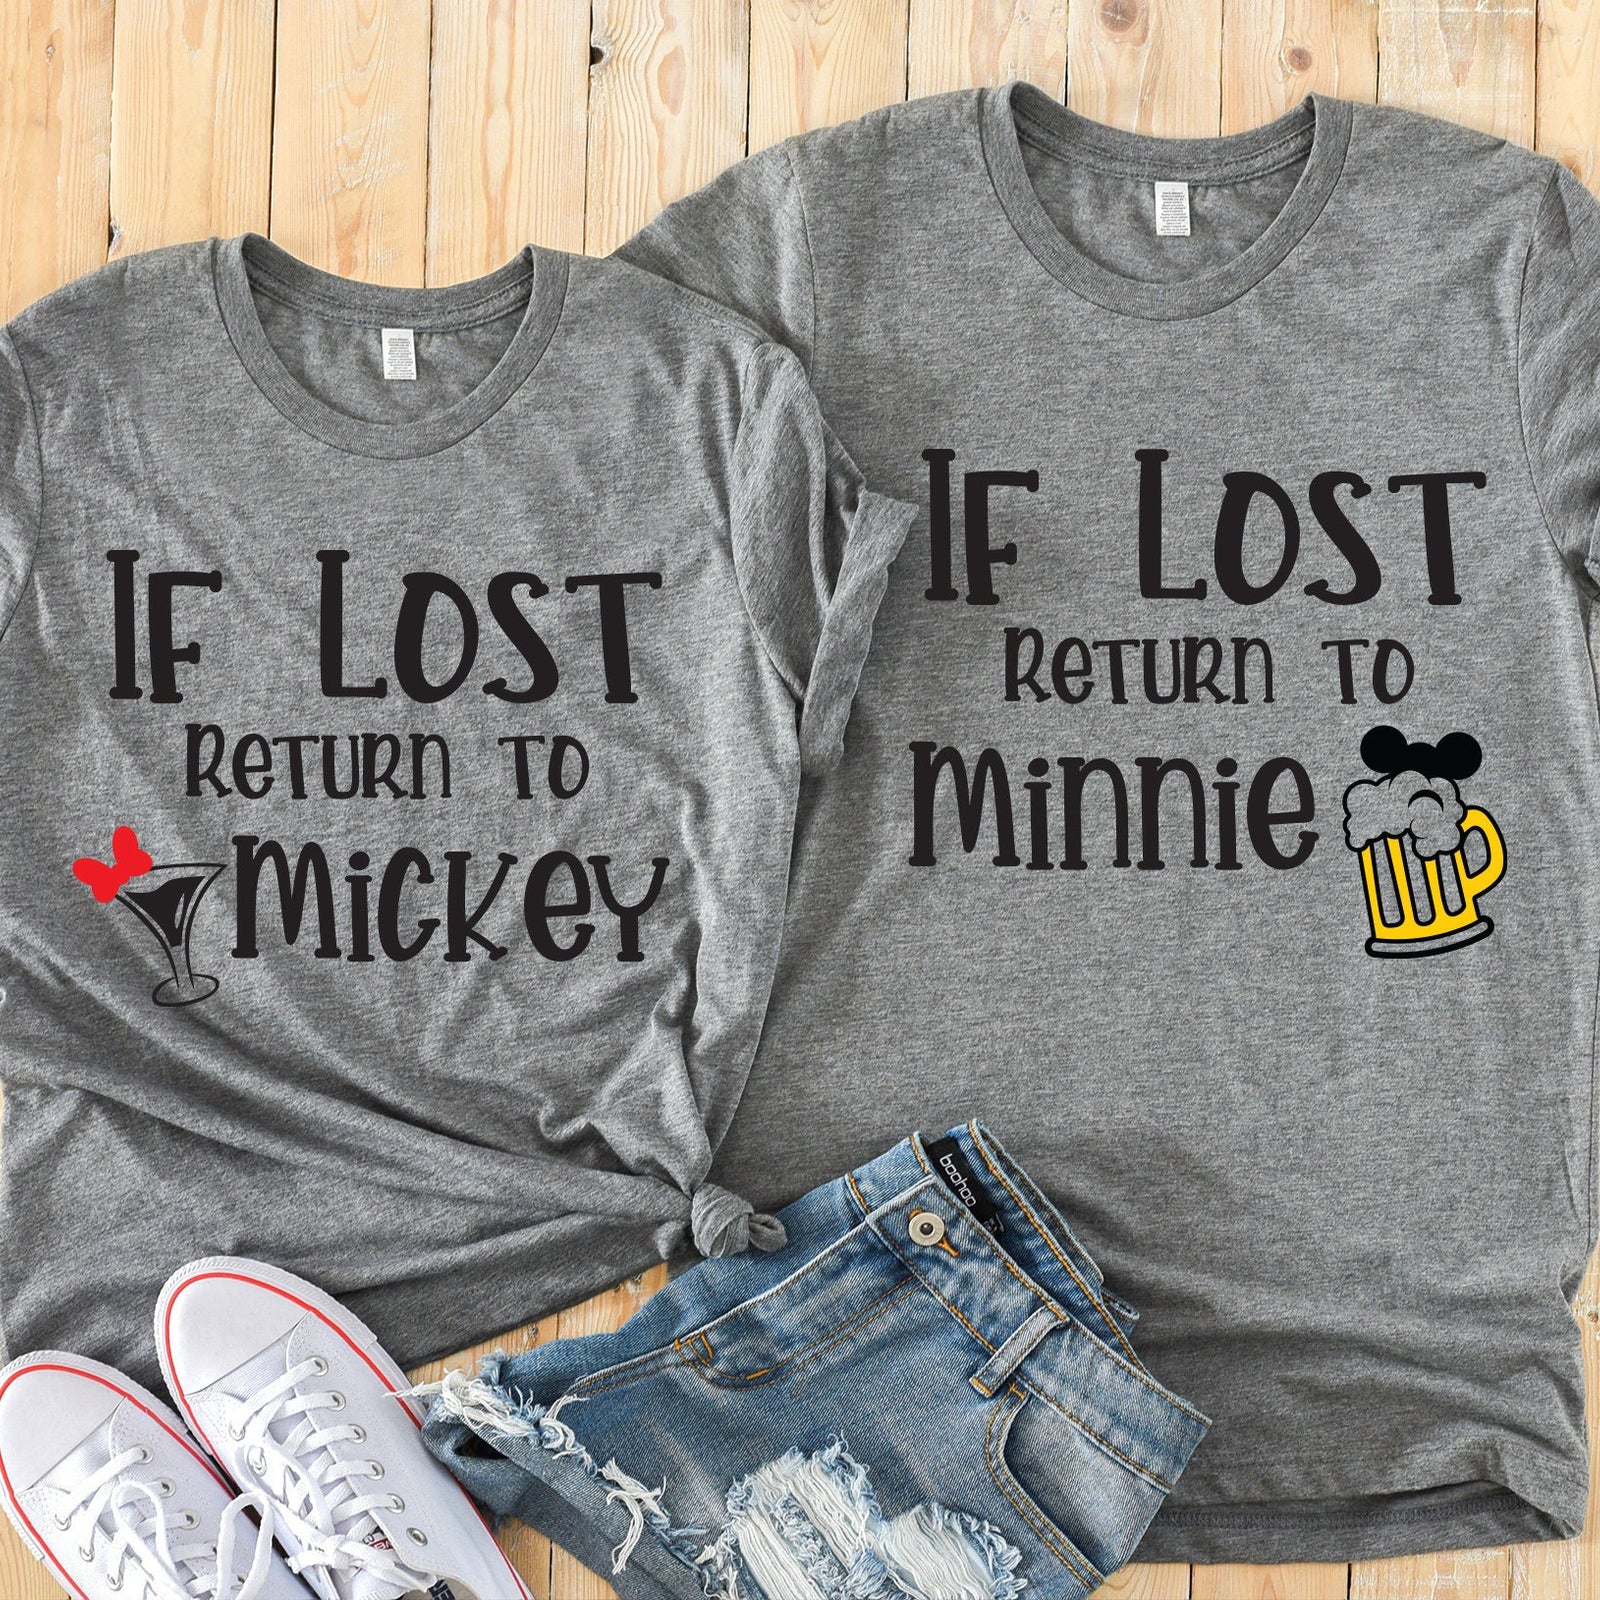 If Lost Return to Mickey or Minnie Mouse Matching Disney Shirts - Disney Couples Shirt - Epcot Food and Wine Festival - Drinking T Shirts